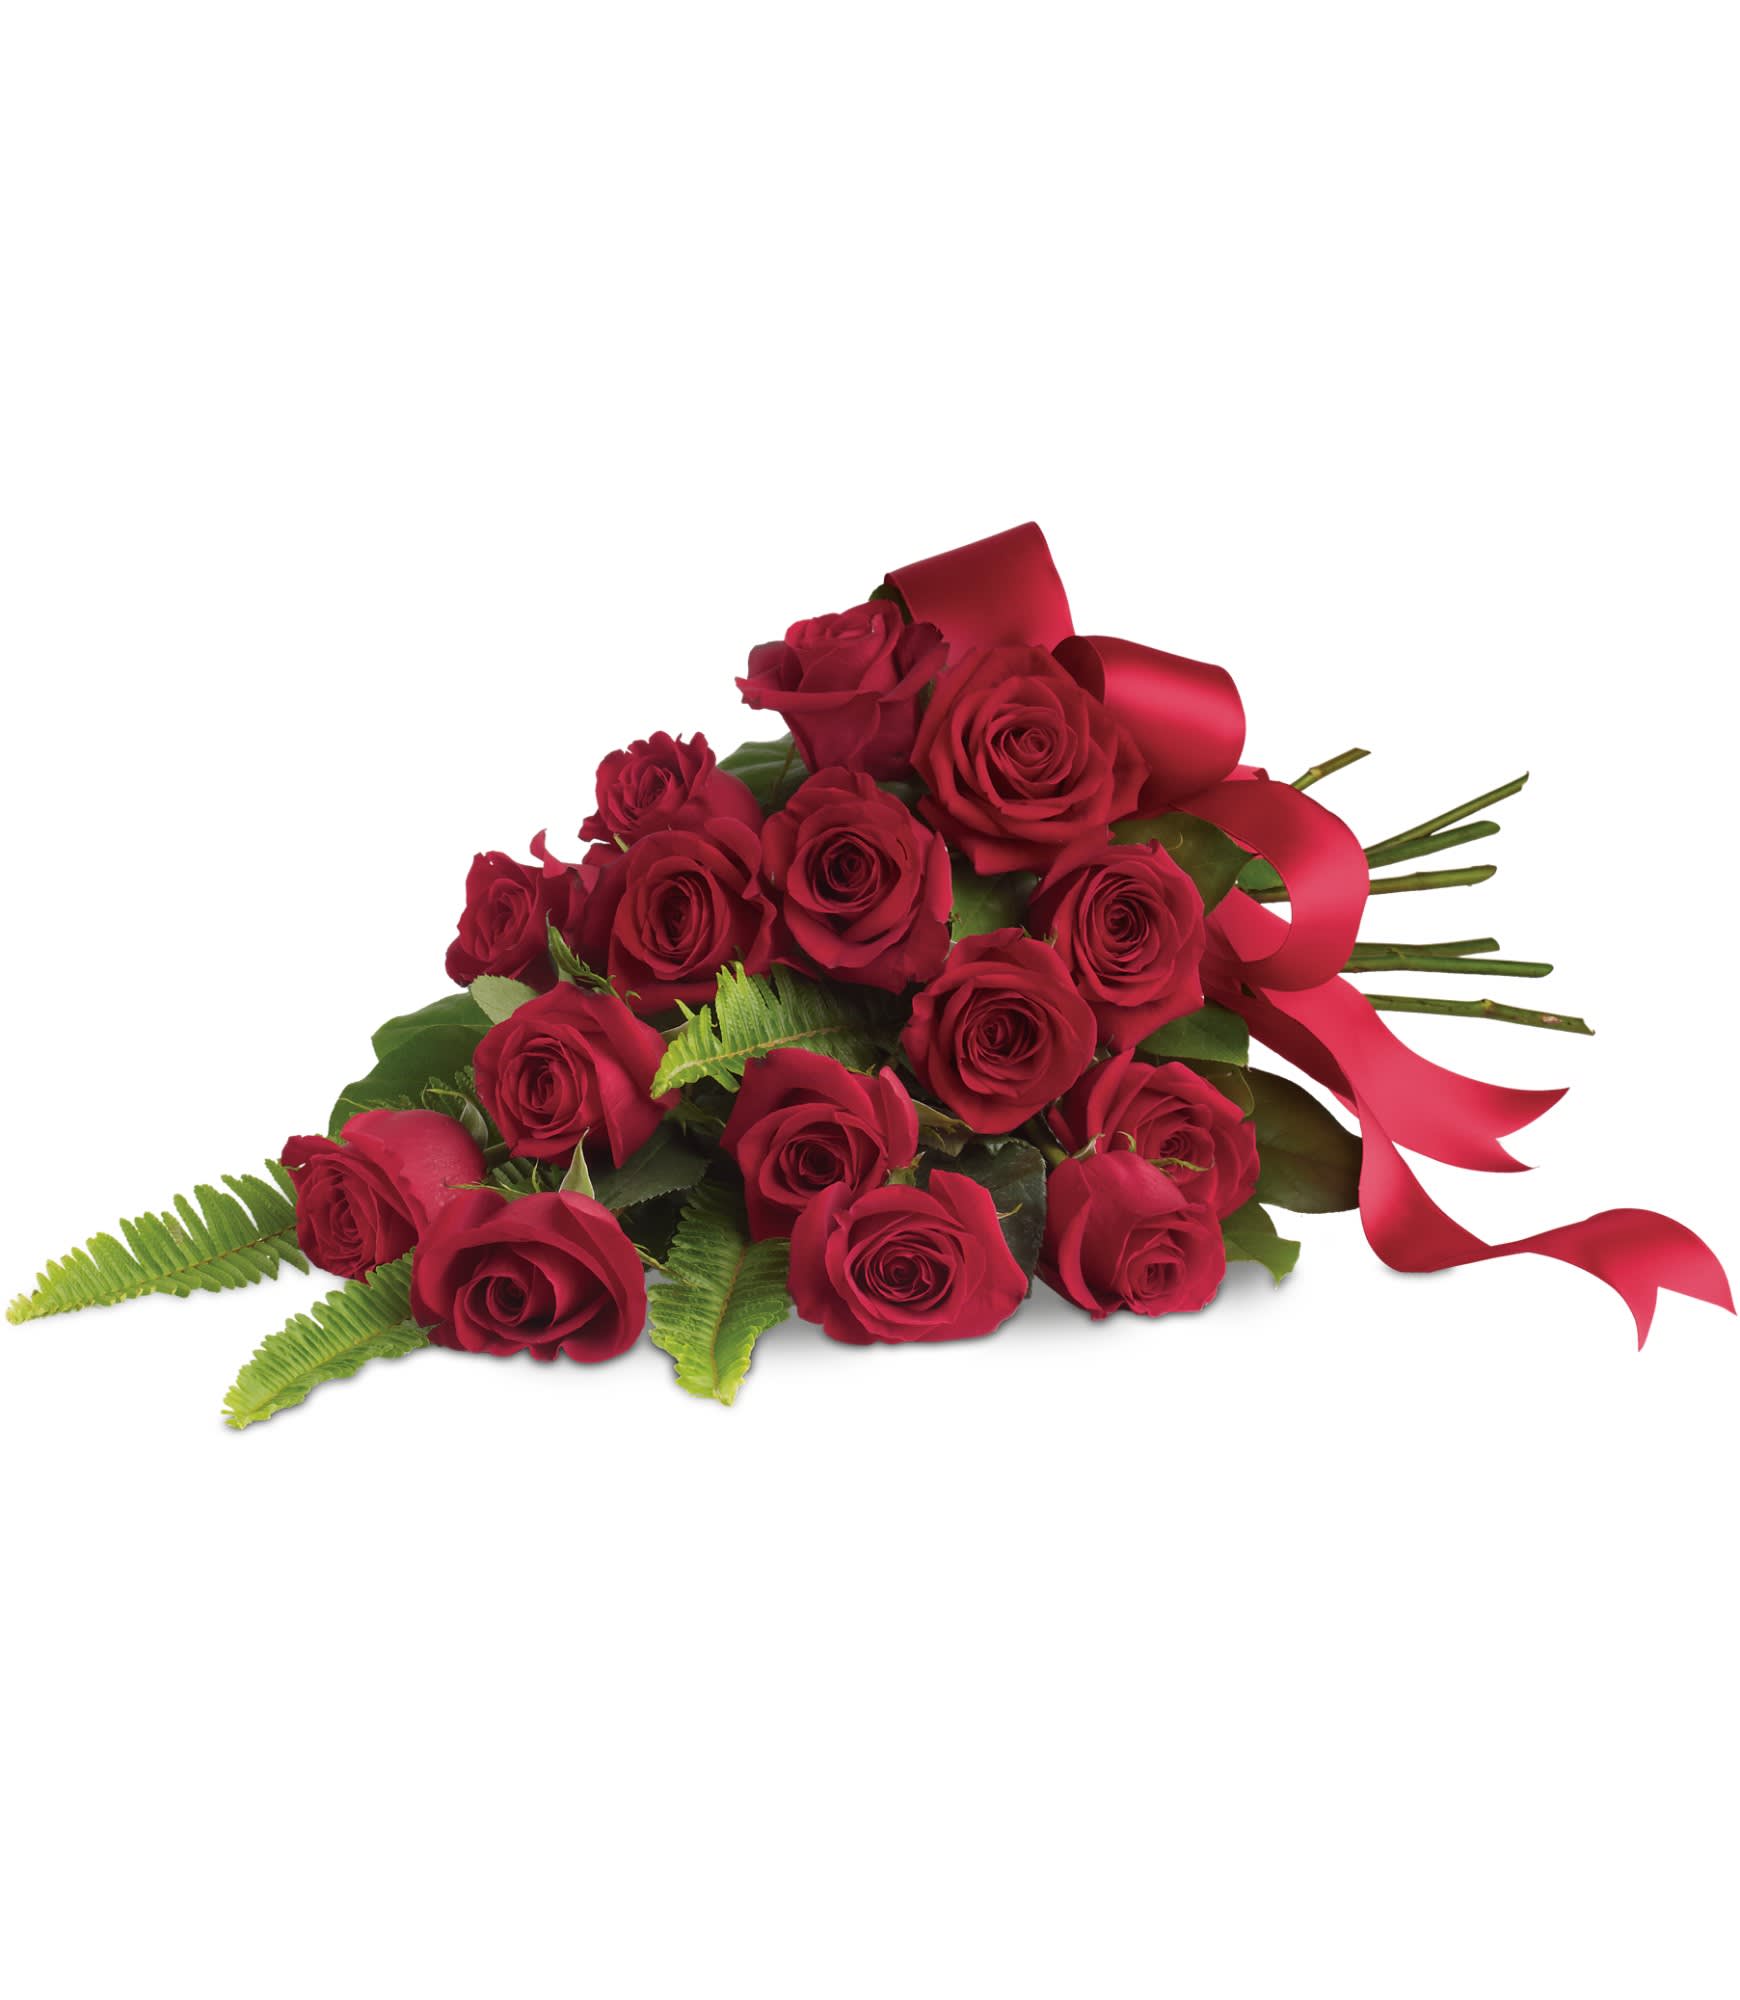 Rose Impression by Teleflora - An elegant all-red rose bouquet hand-tied with satin ribbon. Heartfelt in its simplicity, it is perfectly paired with soft-green sword fern. 